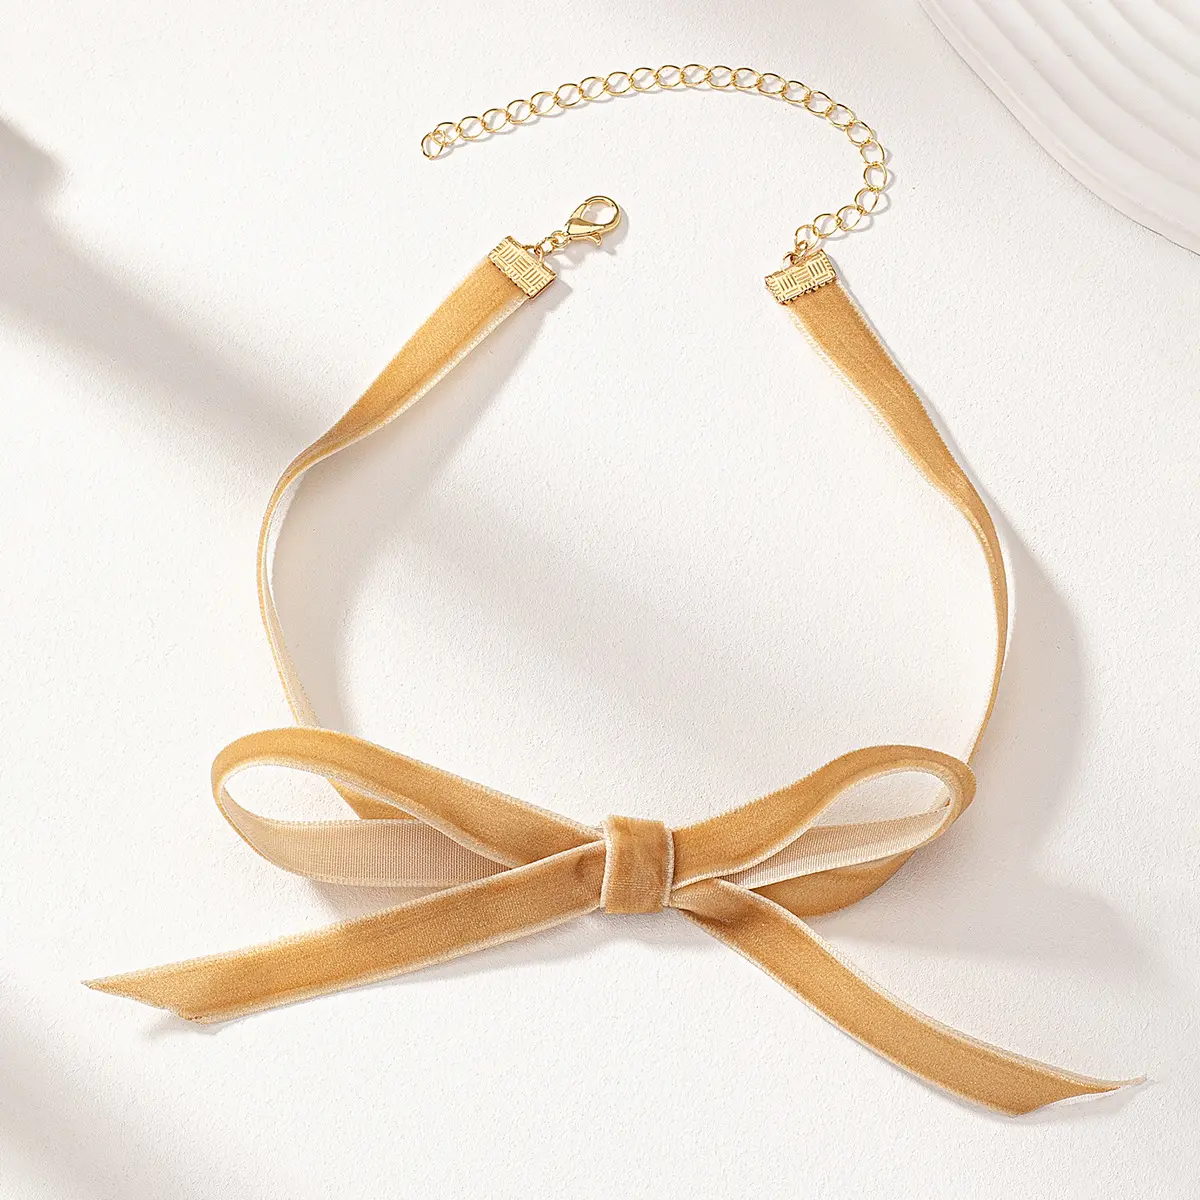 Female French Ribbon Bow Necklace New Explosive Light Luxury Collarbone Chain Advanced Choker jewlery